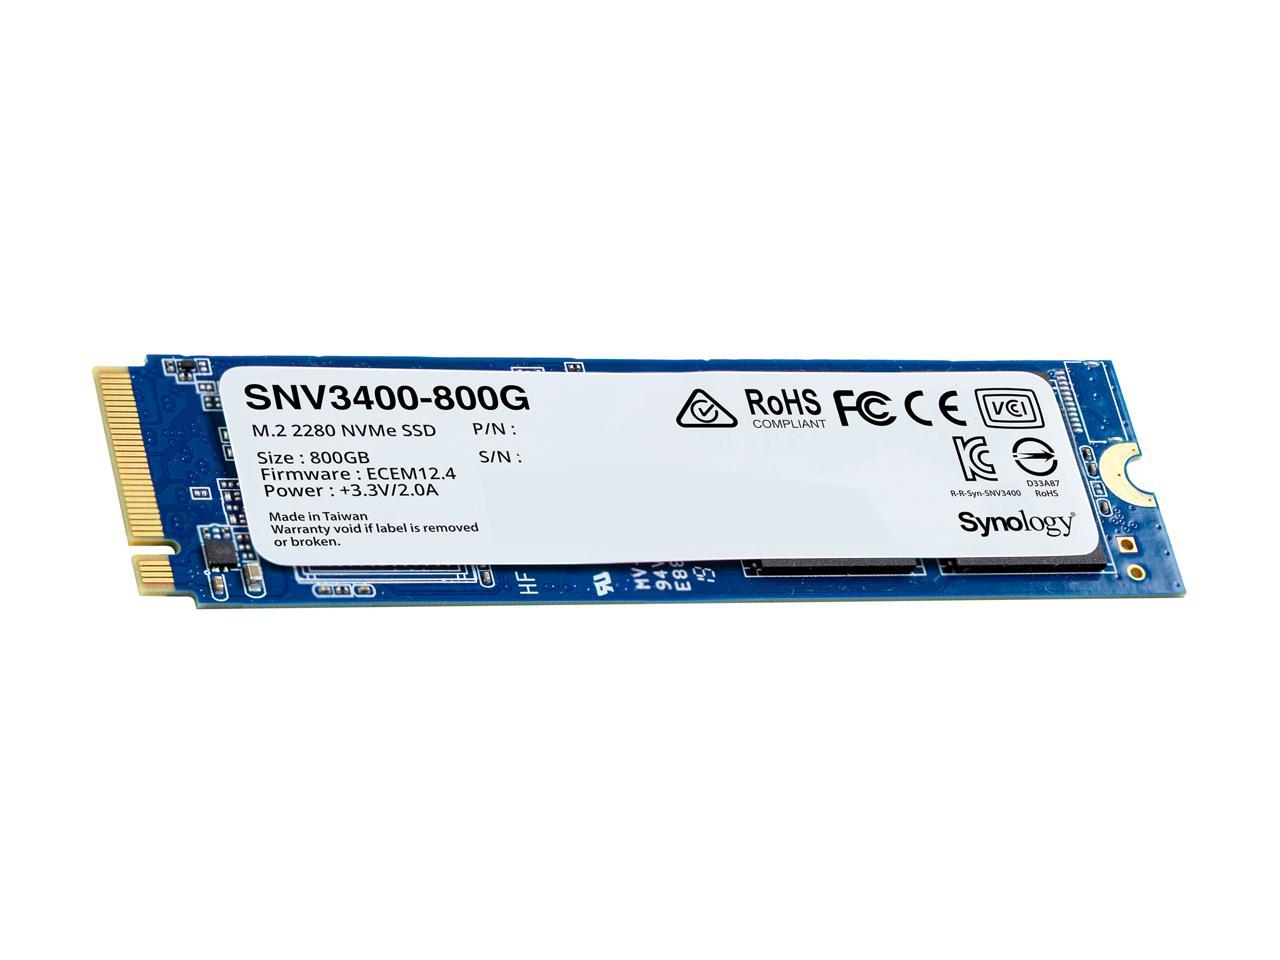 Synology Snv3000 Series Snv3400-800G M.2 2280 Nvme Pci-Express 3.0 X4 Solid State Drive